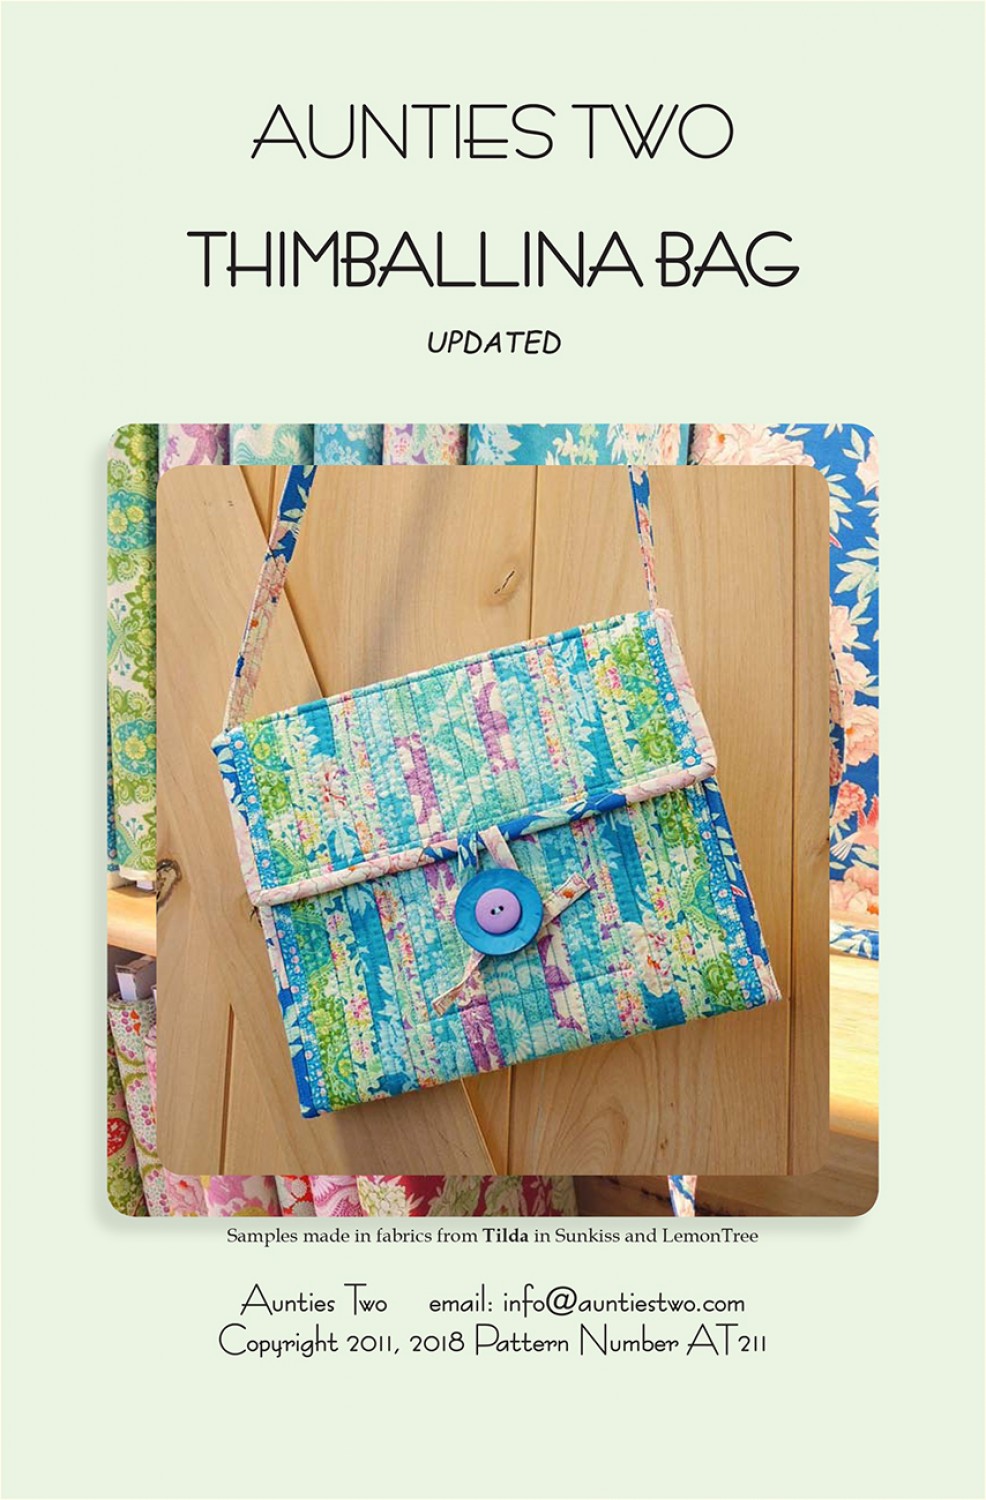 Aunties Two Thimballina Bag Pattern